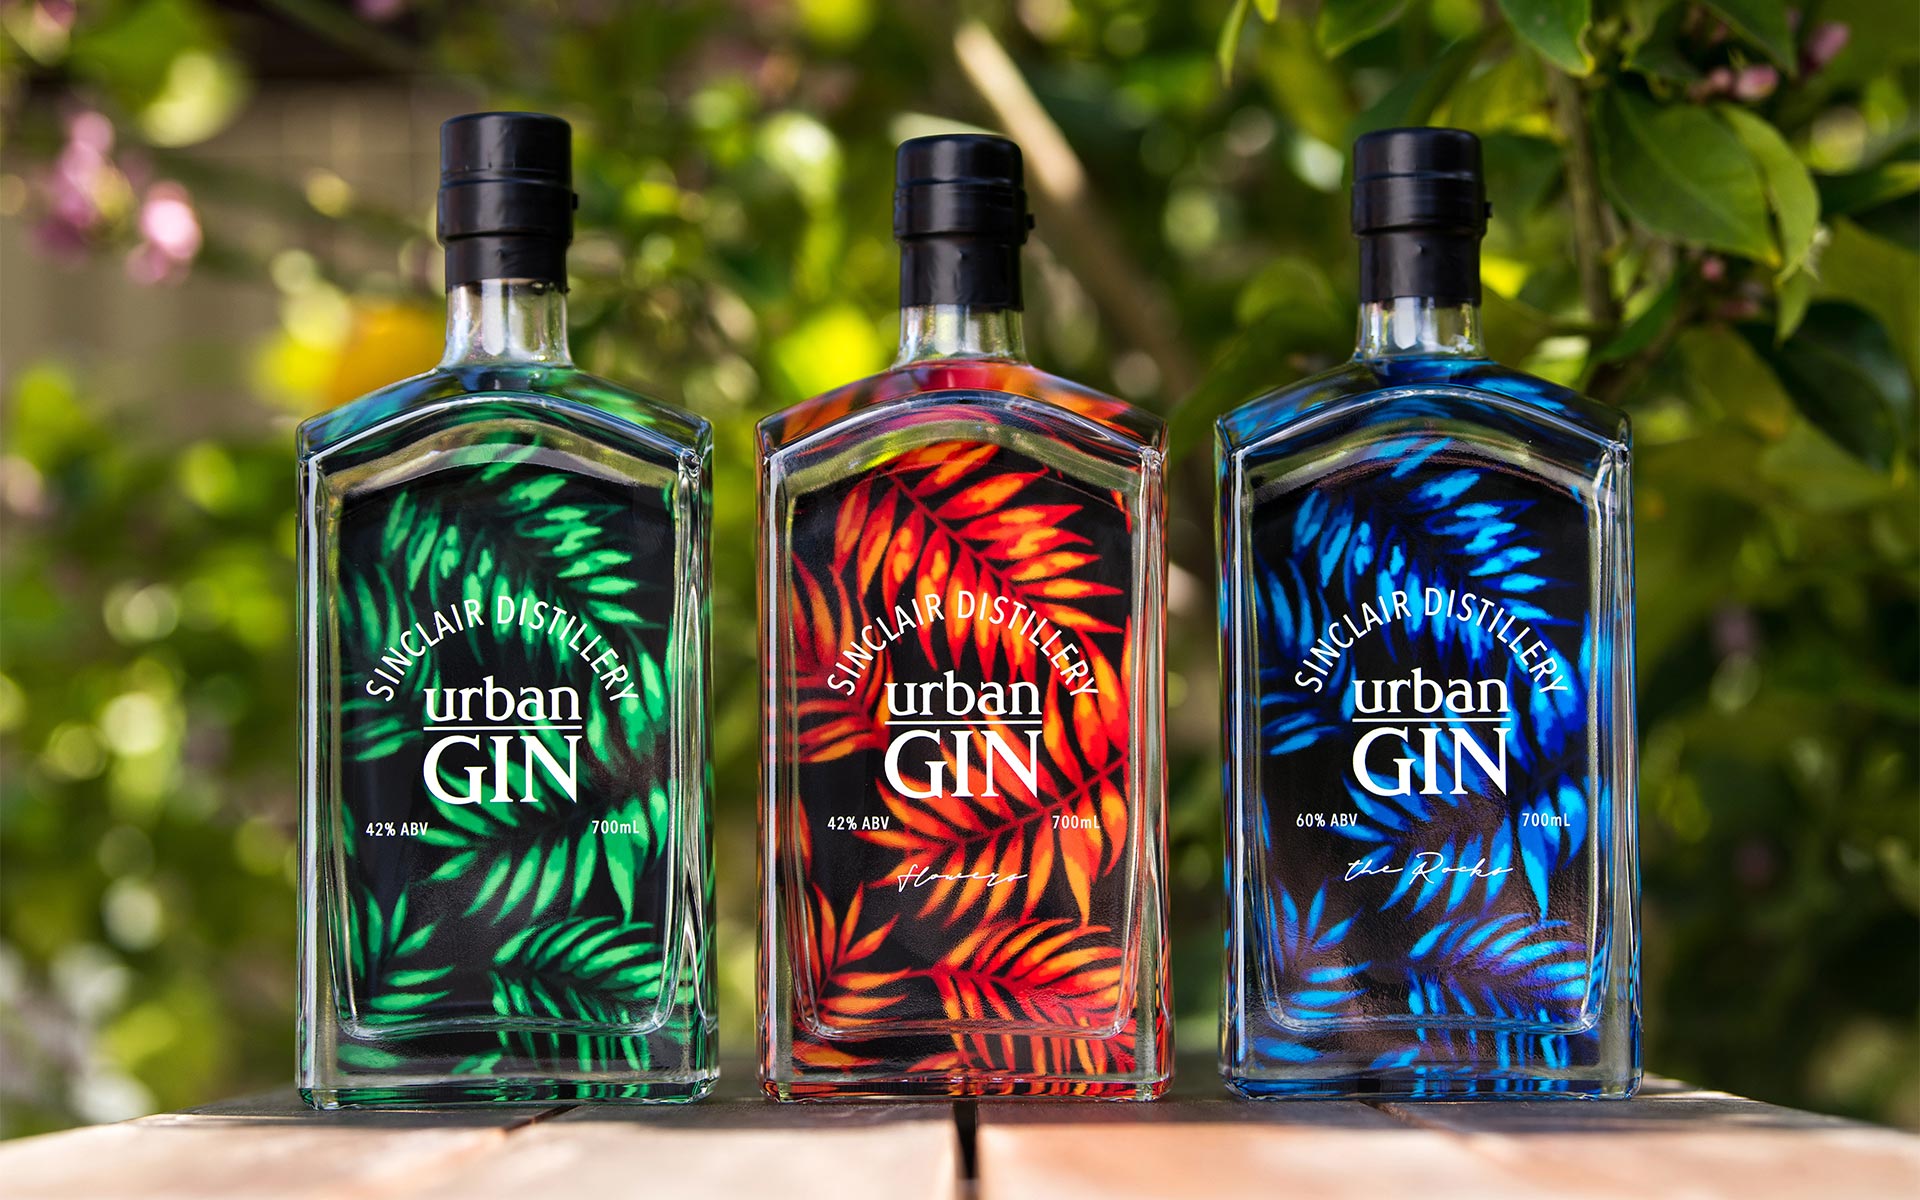 Urban Gin product range against a leafy background